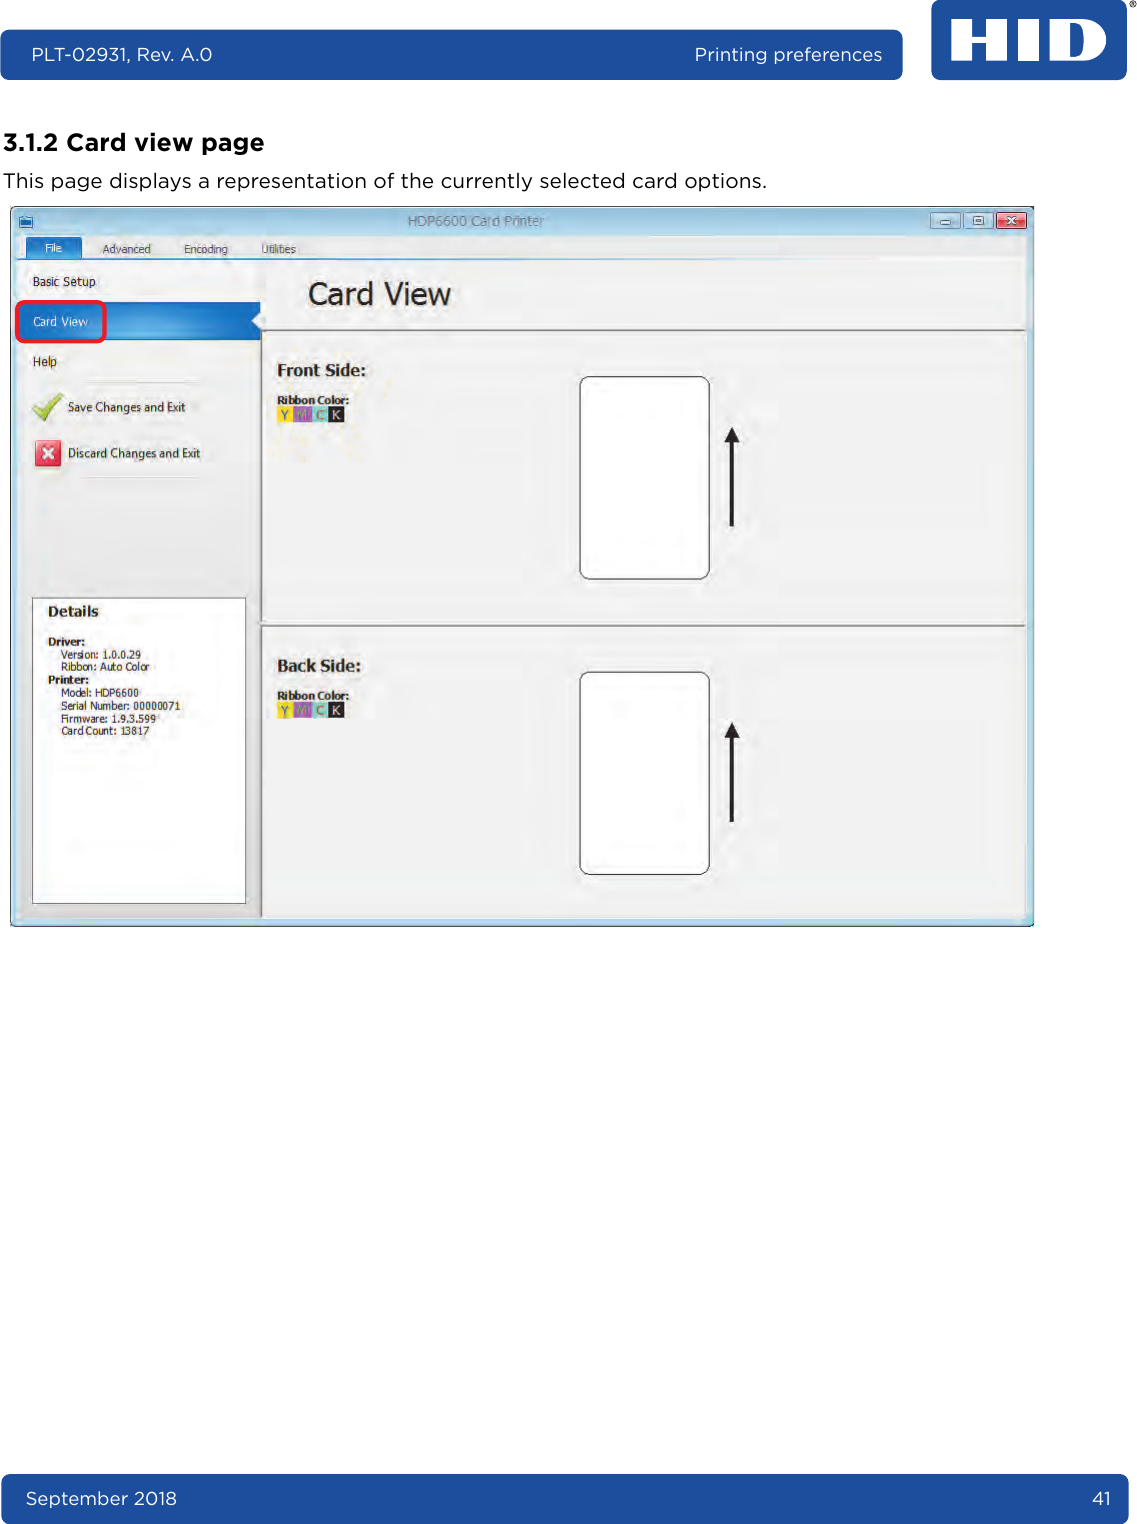 September 2018 41PLT-02931, Rev. A.0 Printing preferences3.1.2 Card view pageThis page displays a representation of the currently selected card options.